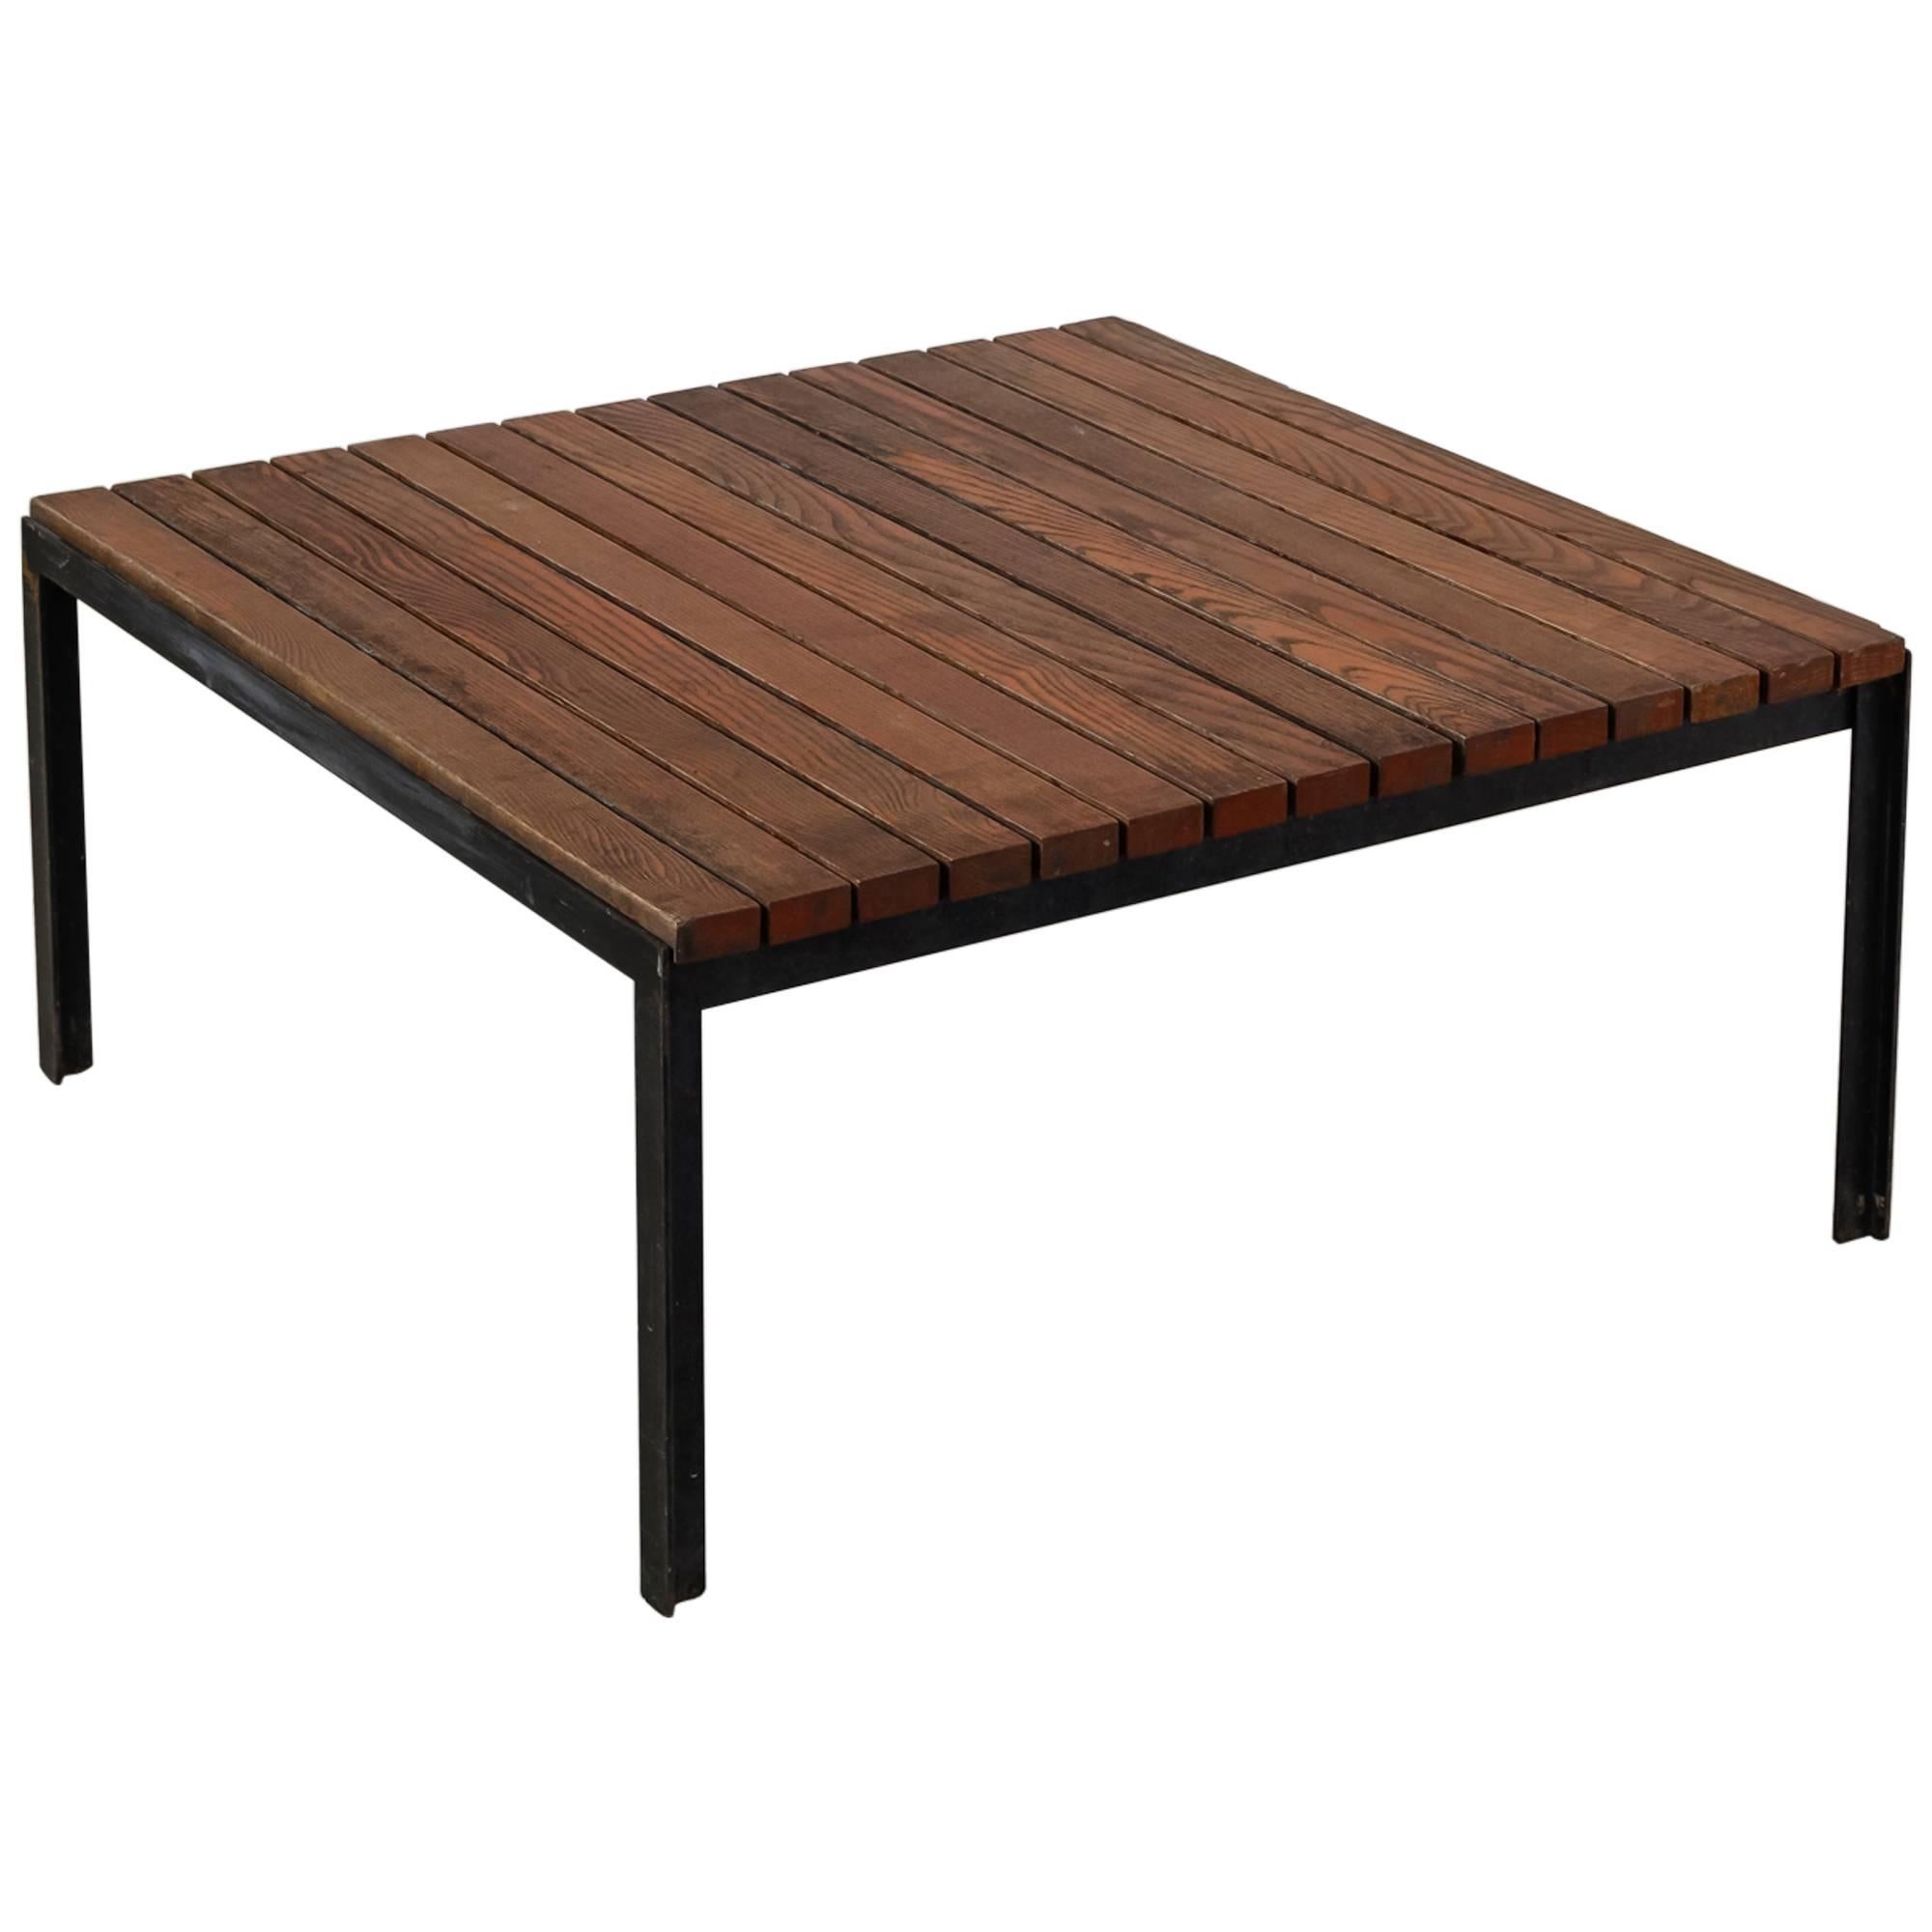 Florence Knoll Early "T-Bar" Slat Coffee or Side Table, USA, 1950s For Sale